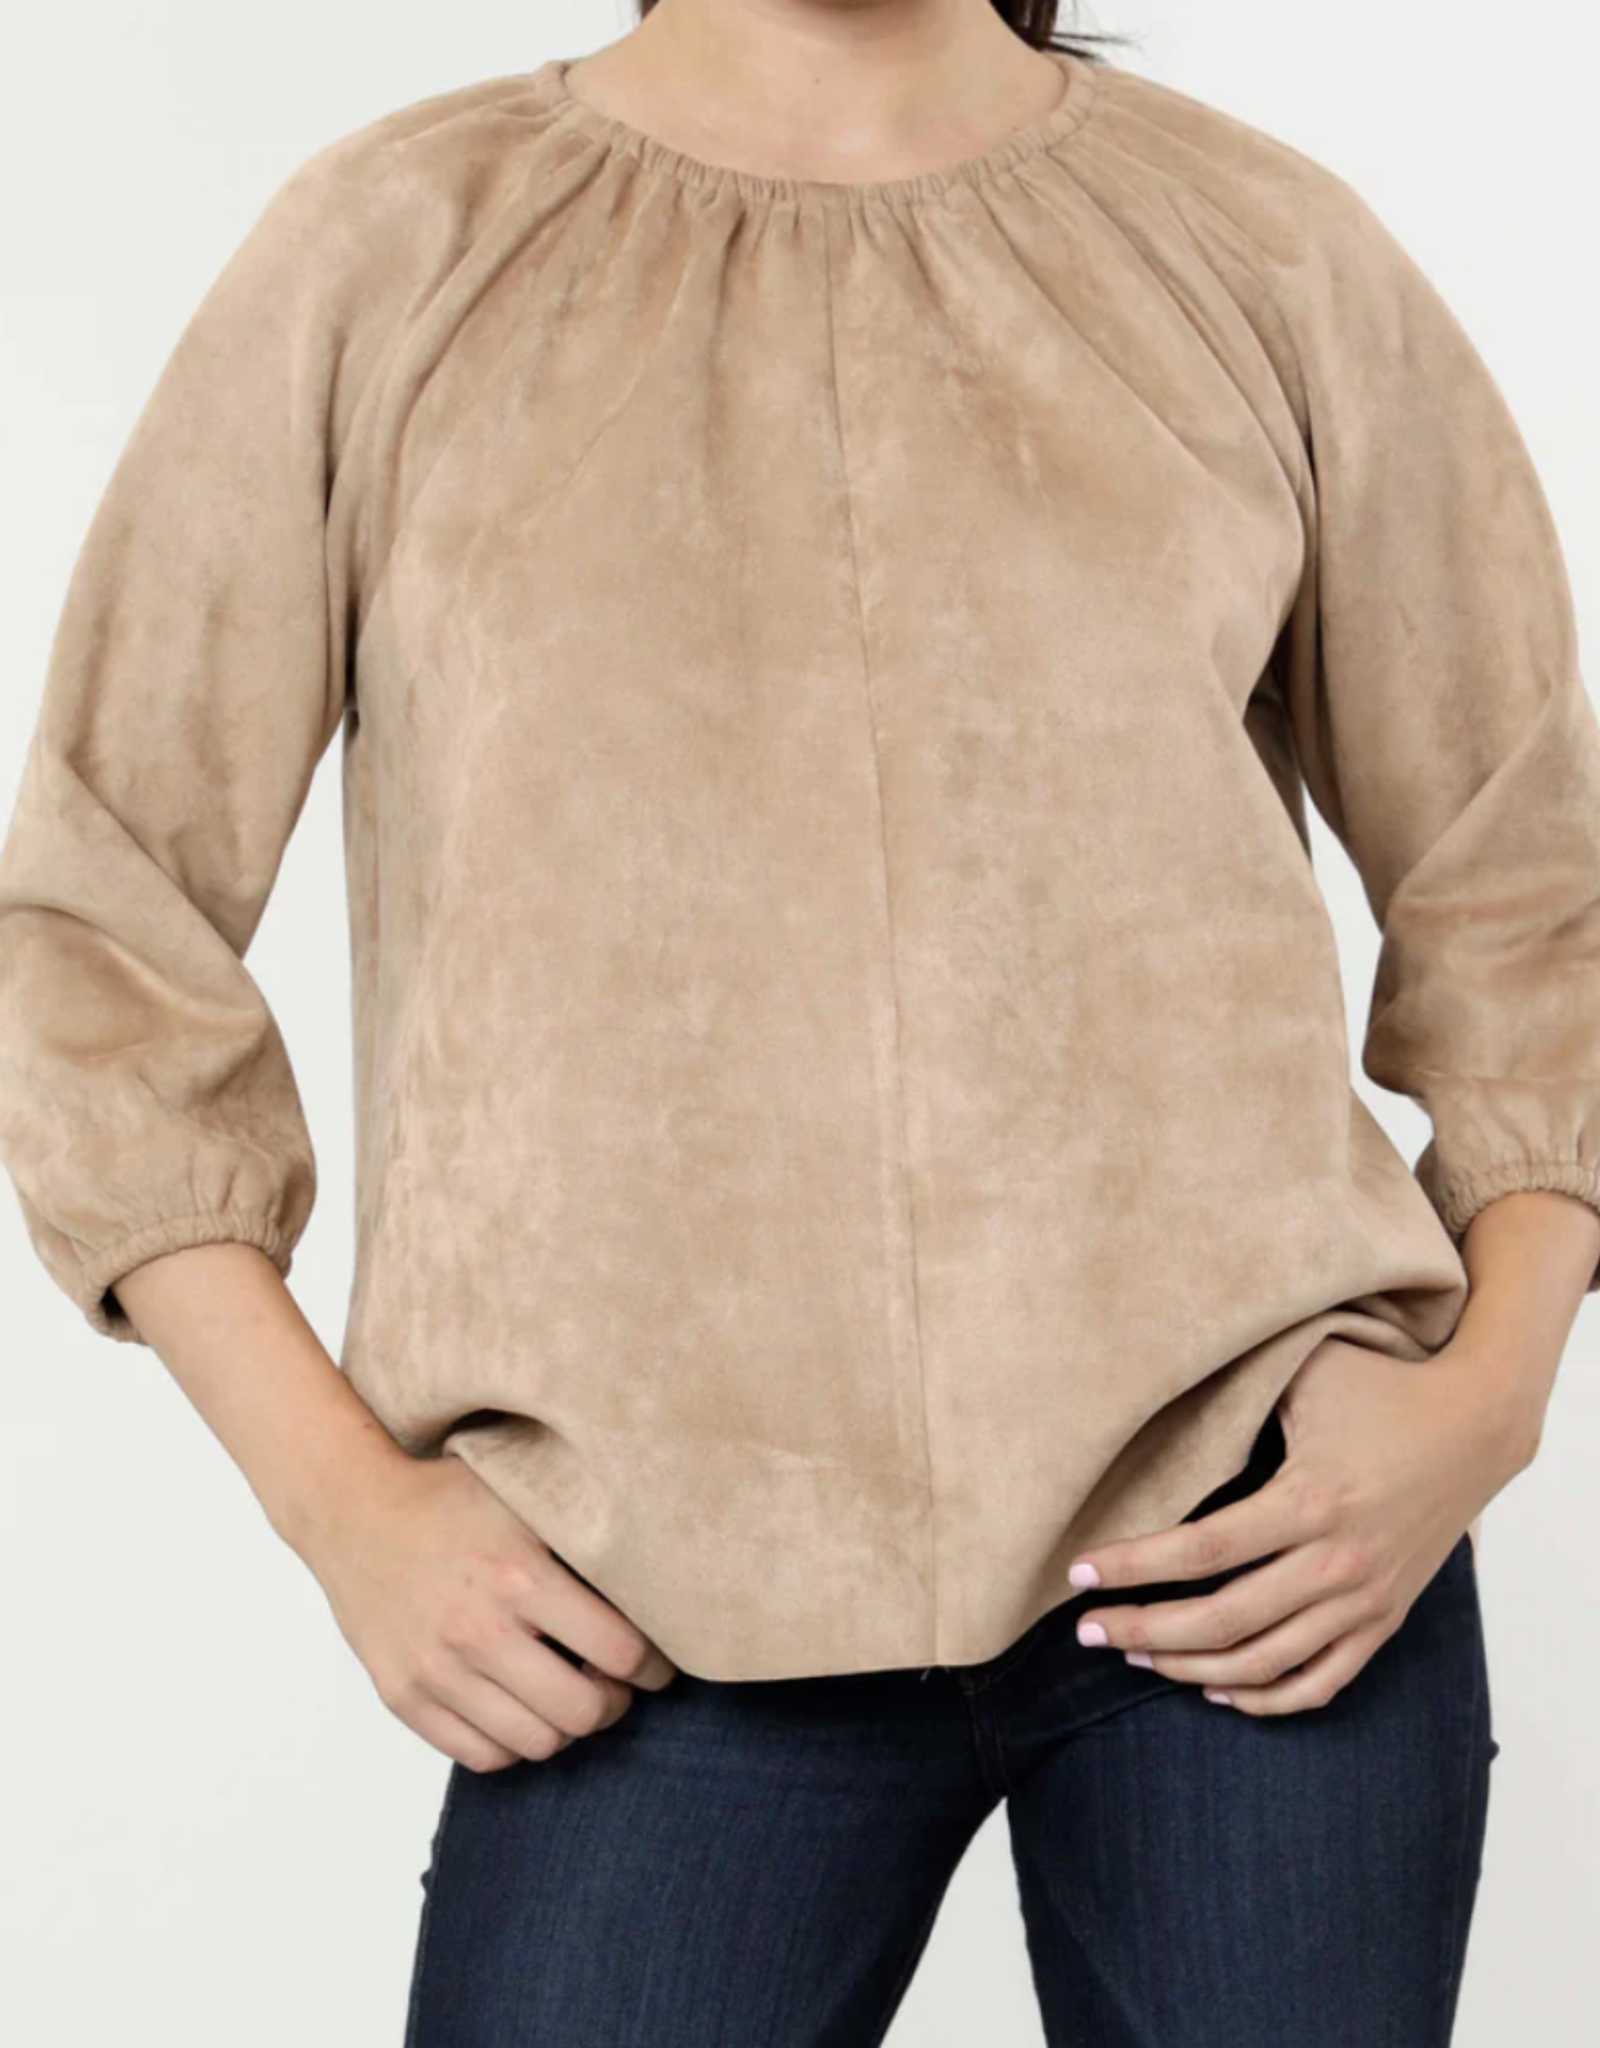 Dolce Cabo Dolce Cabo Faux Suede Puff Sleeve Top Camel